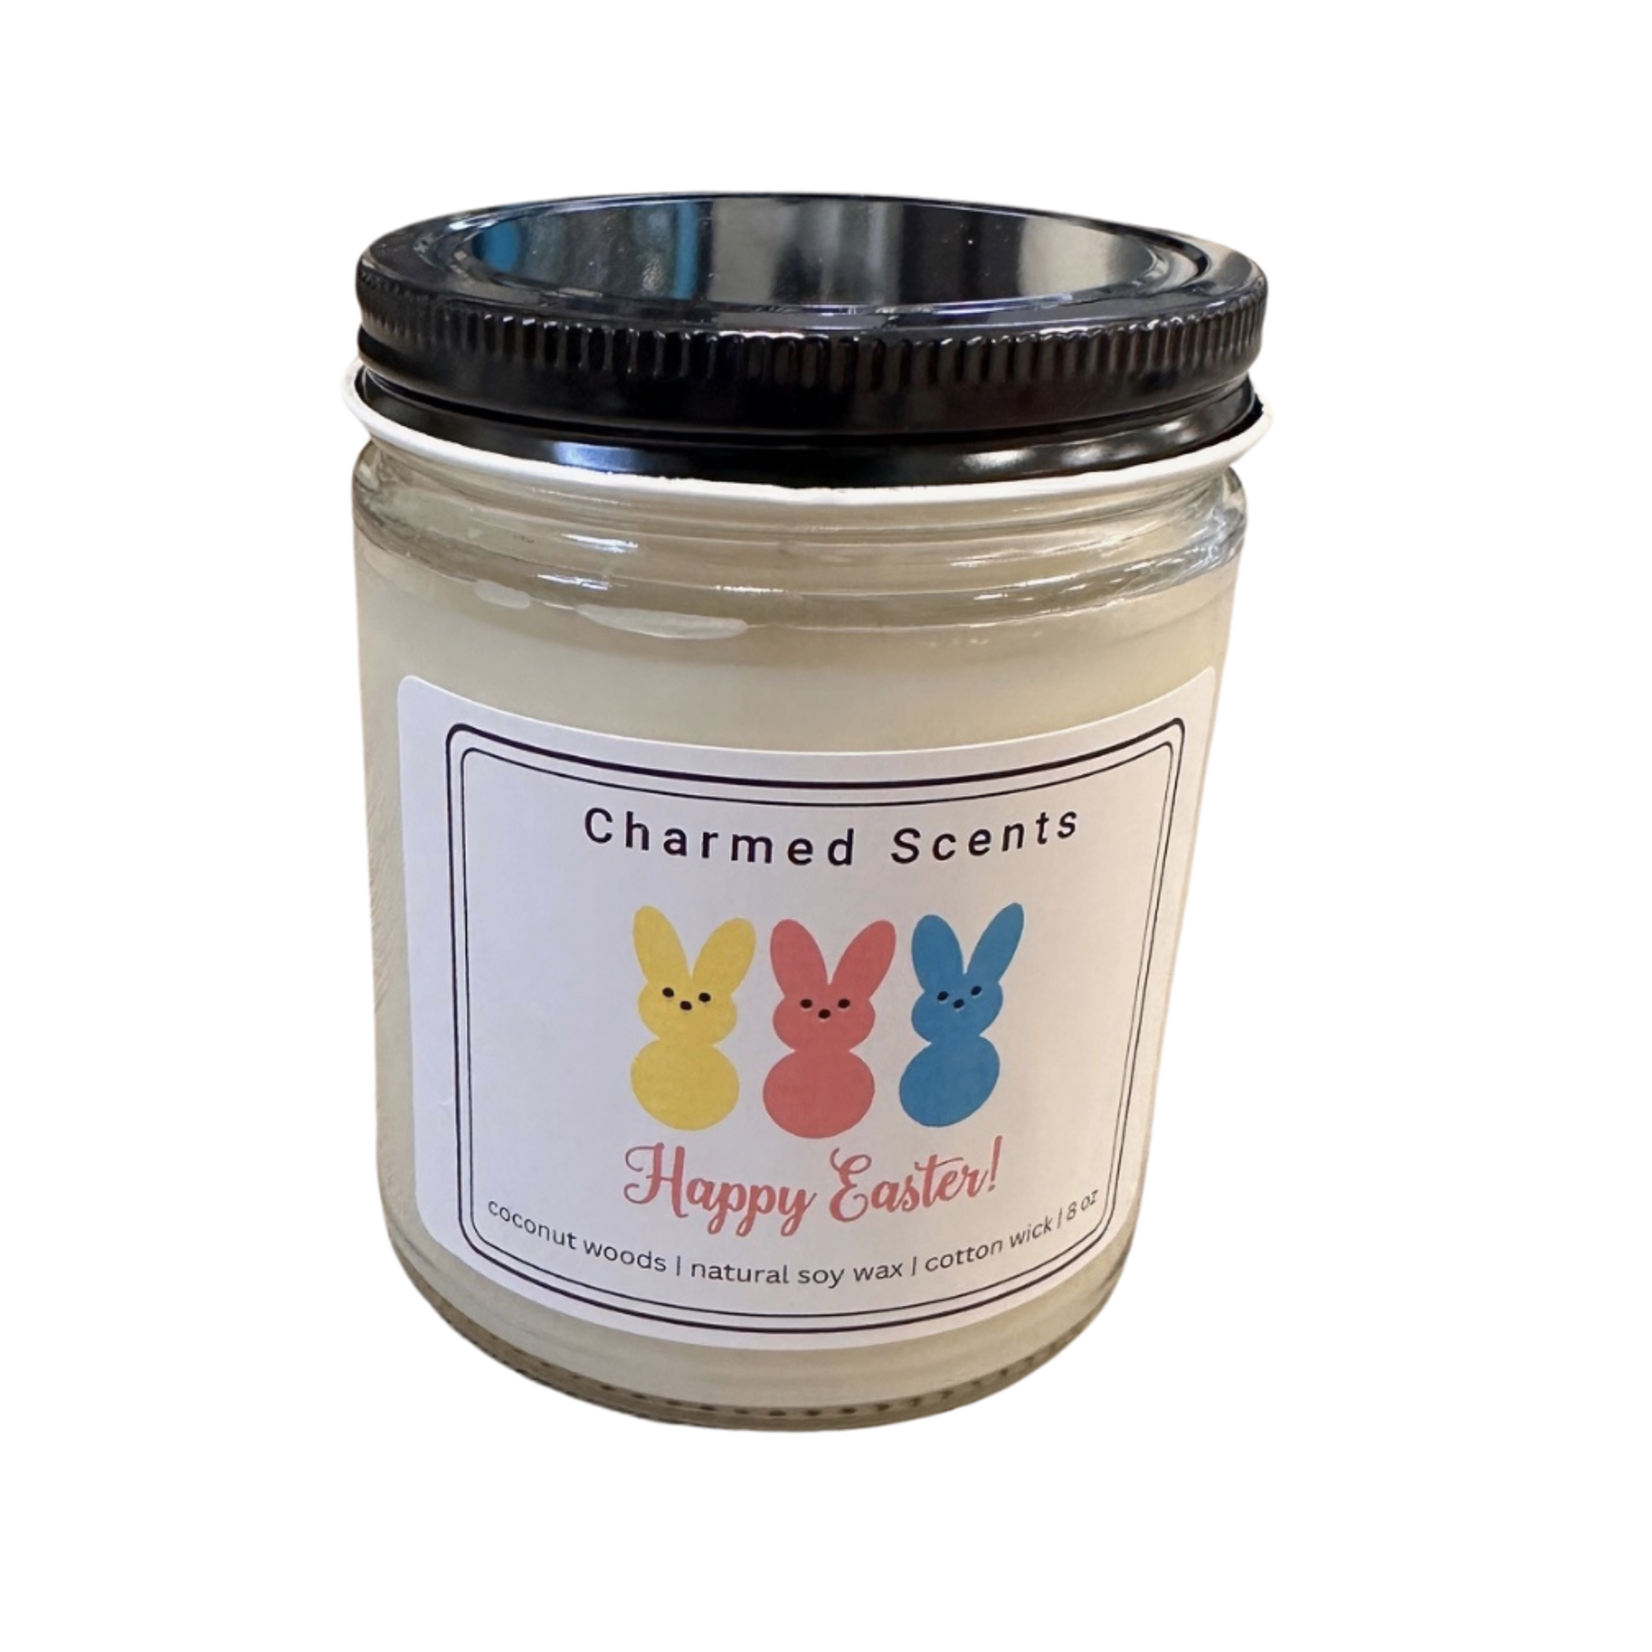 Charmed Scents - 8 oz Soy Candle - Happy Easter